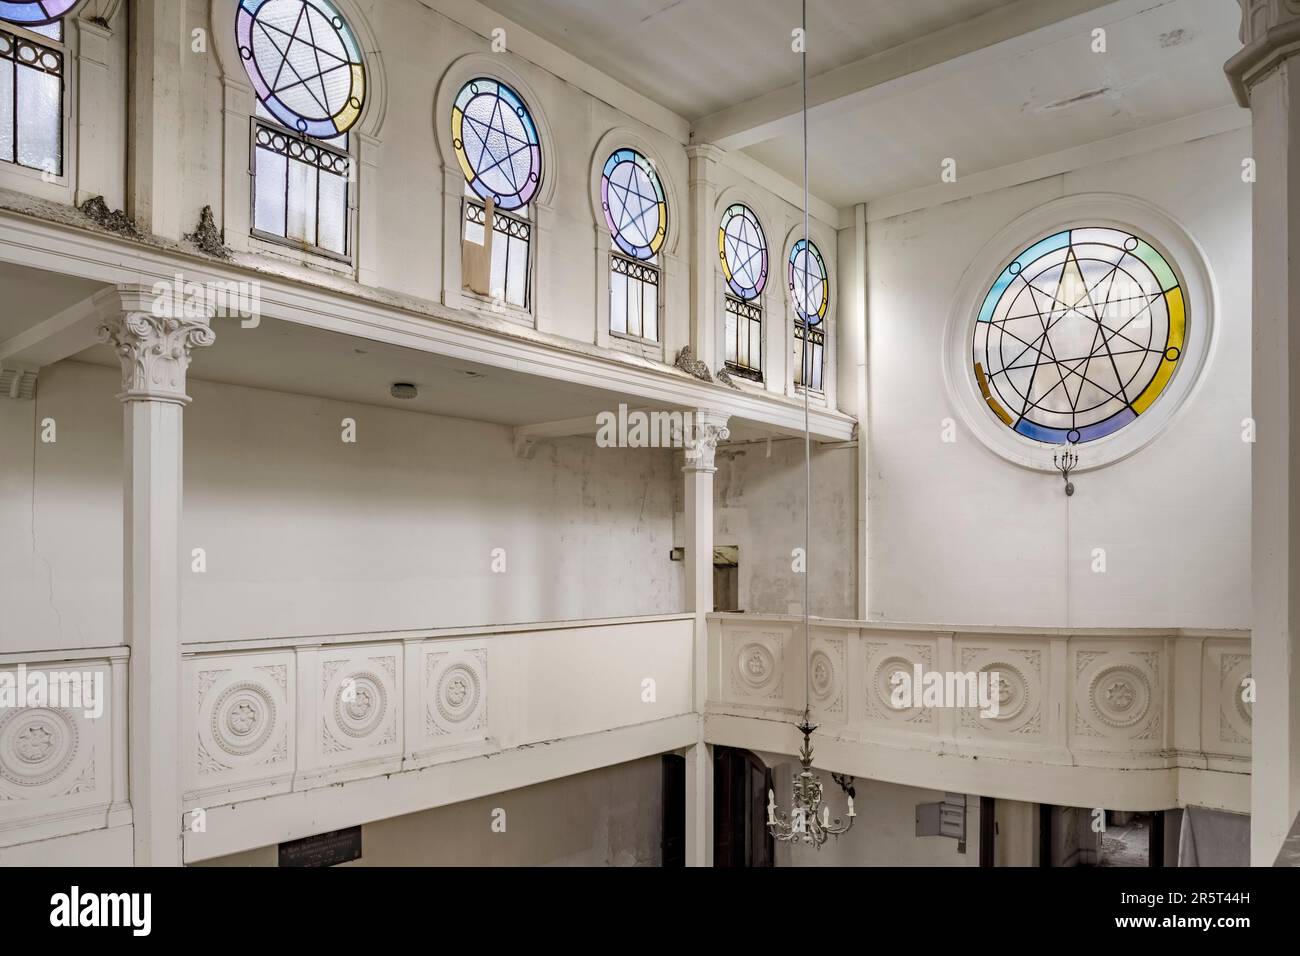 France, Seine-Maritime, Elbeuf-sur-Seine, designated as French Towns and Lands of Art and History, interior of the synagogue, women's gallery and details of the multicolored stained glass windows bearing the seal of Solomon, inaugurated in 1909, closed since 1995, selected for the Heritage Lotto in March 2023 Stock Photo